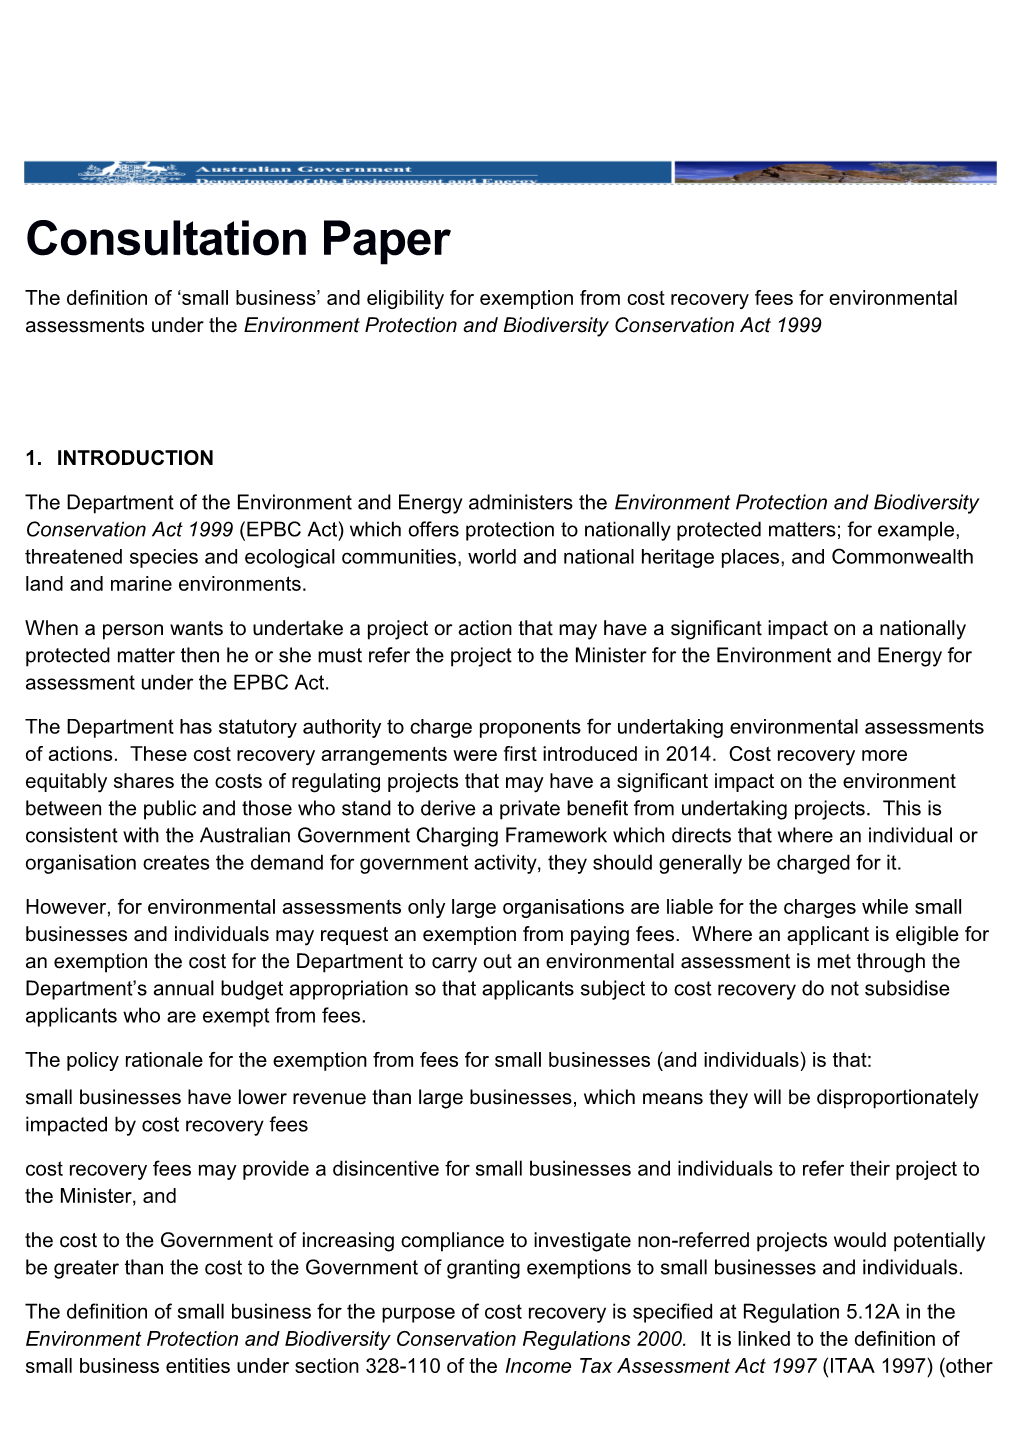 Consultation Paper: the Definition of Small Business and Eligibility for Exemption From